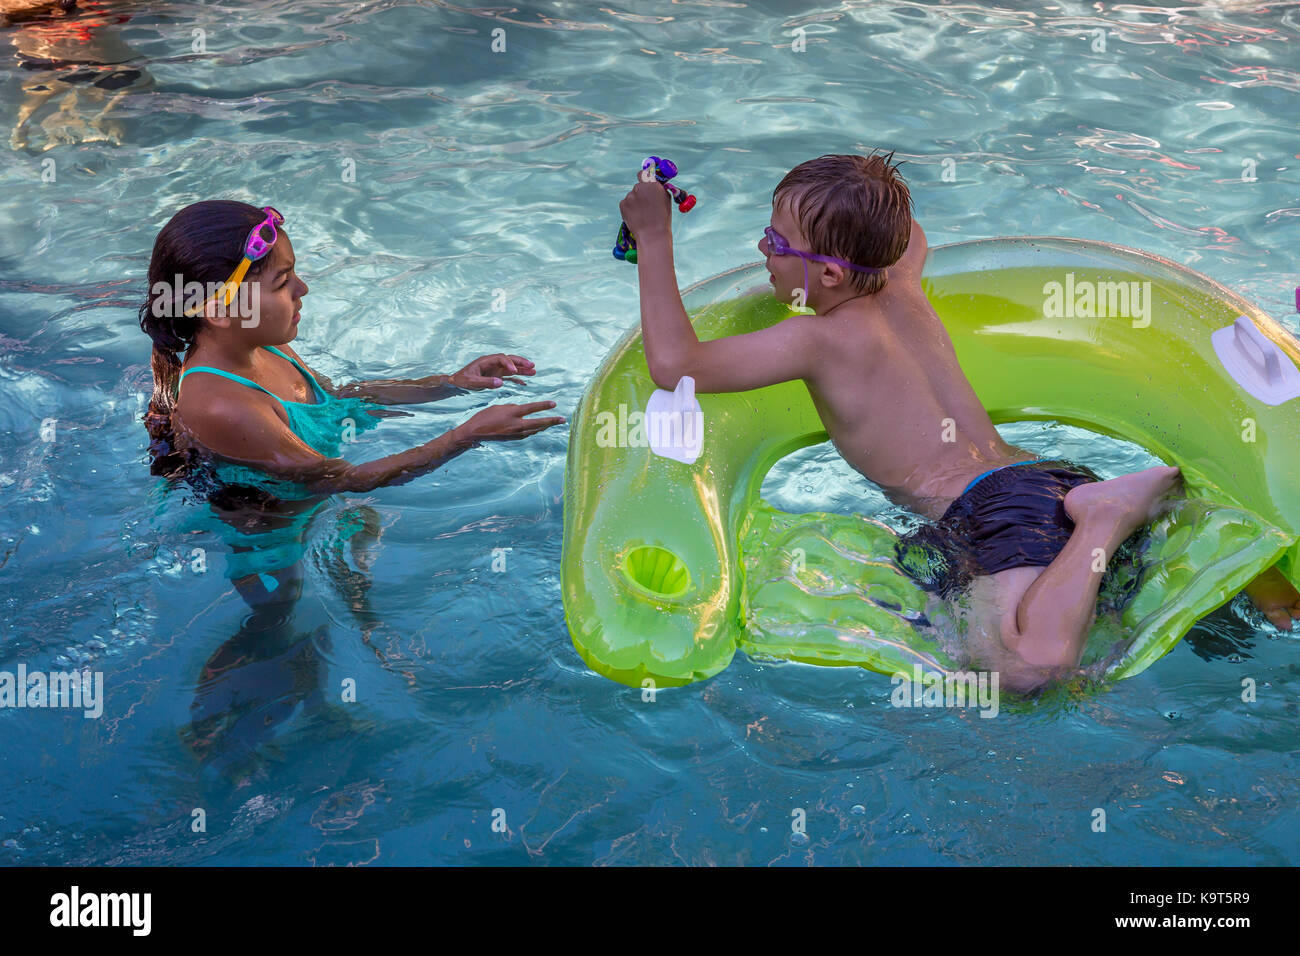 girl and boy, children, playing in pool, swimming pool, freshwater swimming pool, pool party, Castro Valley, Alameda County, California, United States Stock Photo